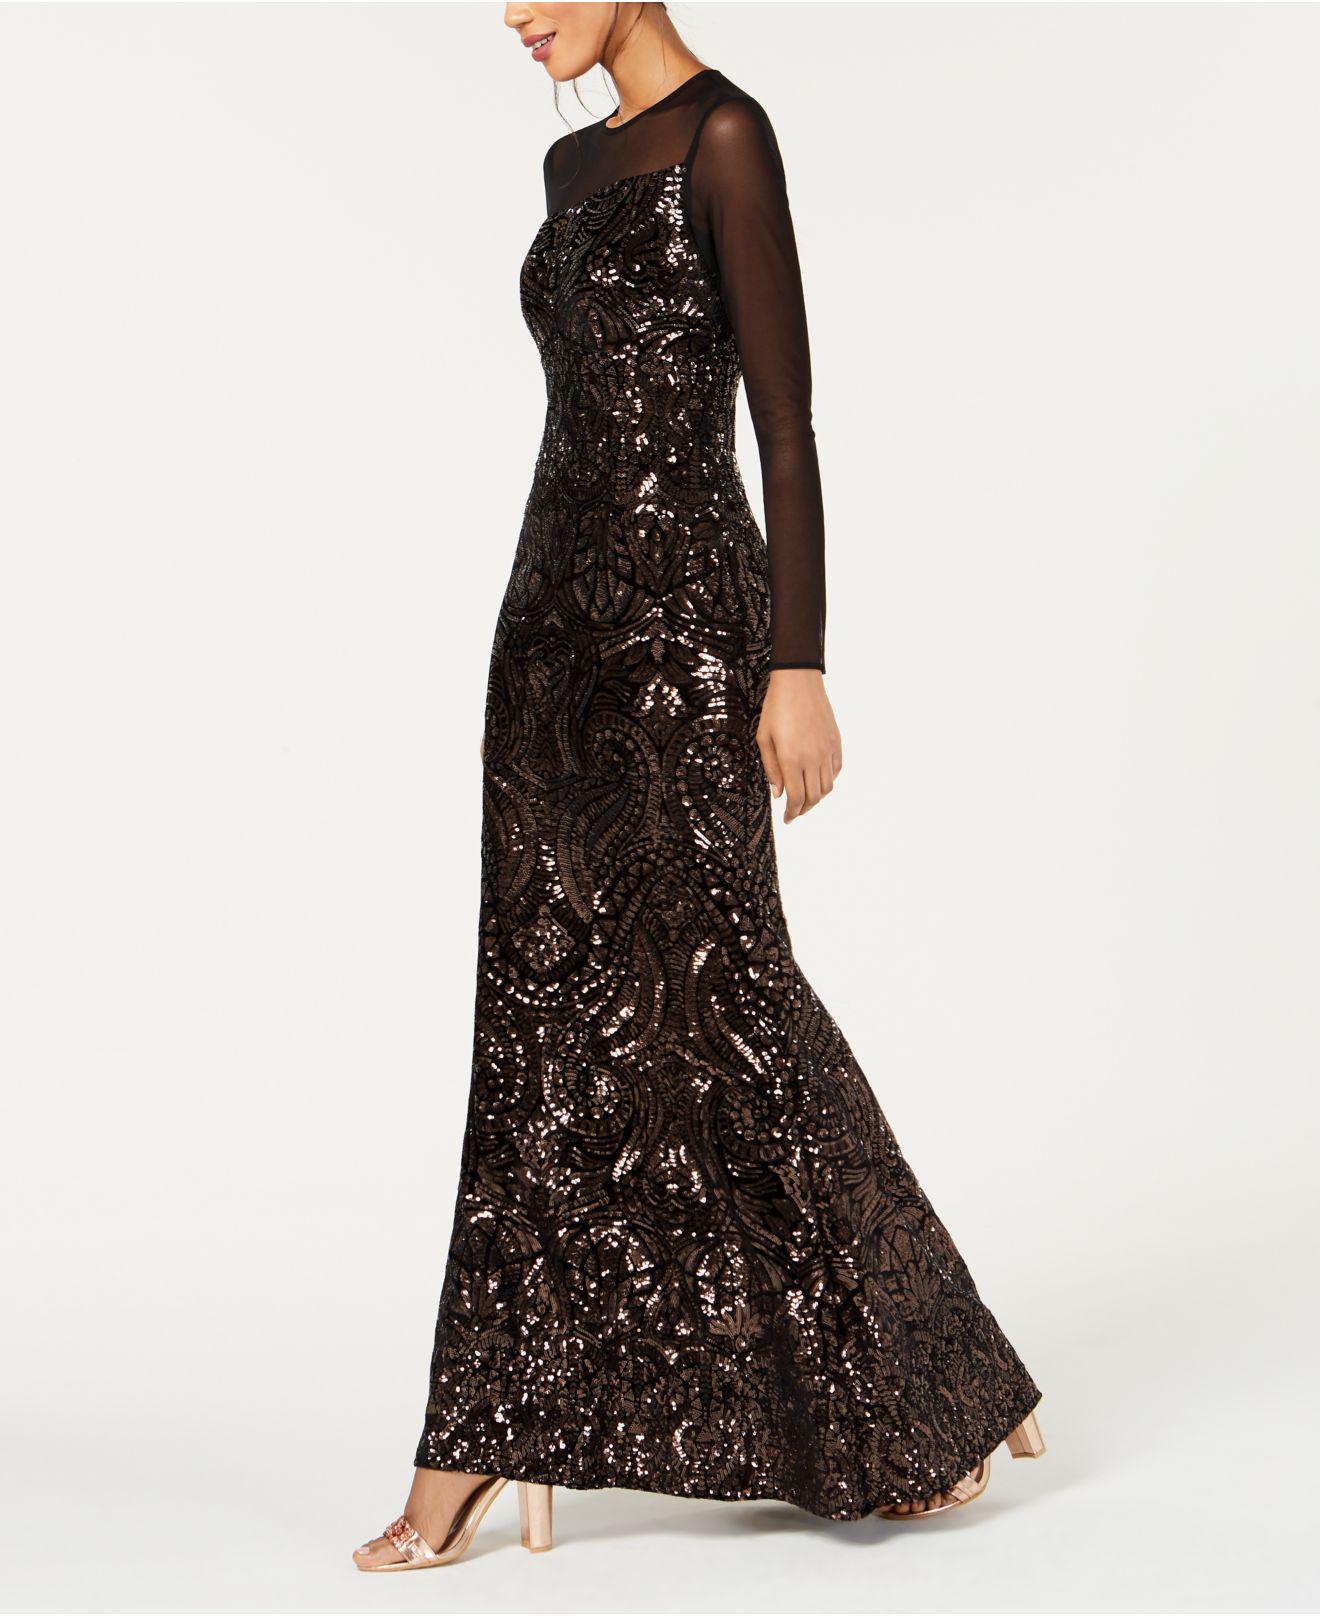 Best Sellers | Long sleeve gown, Black sequin gown, Long sleeve sequin